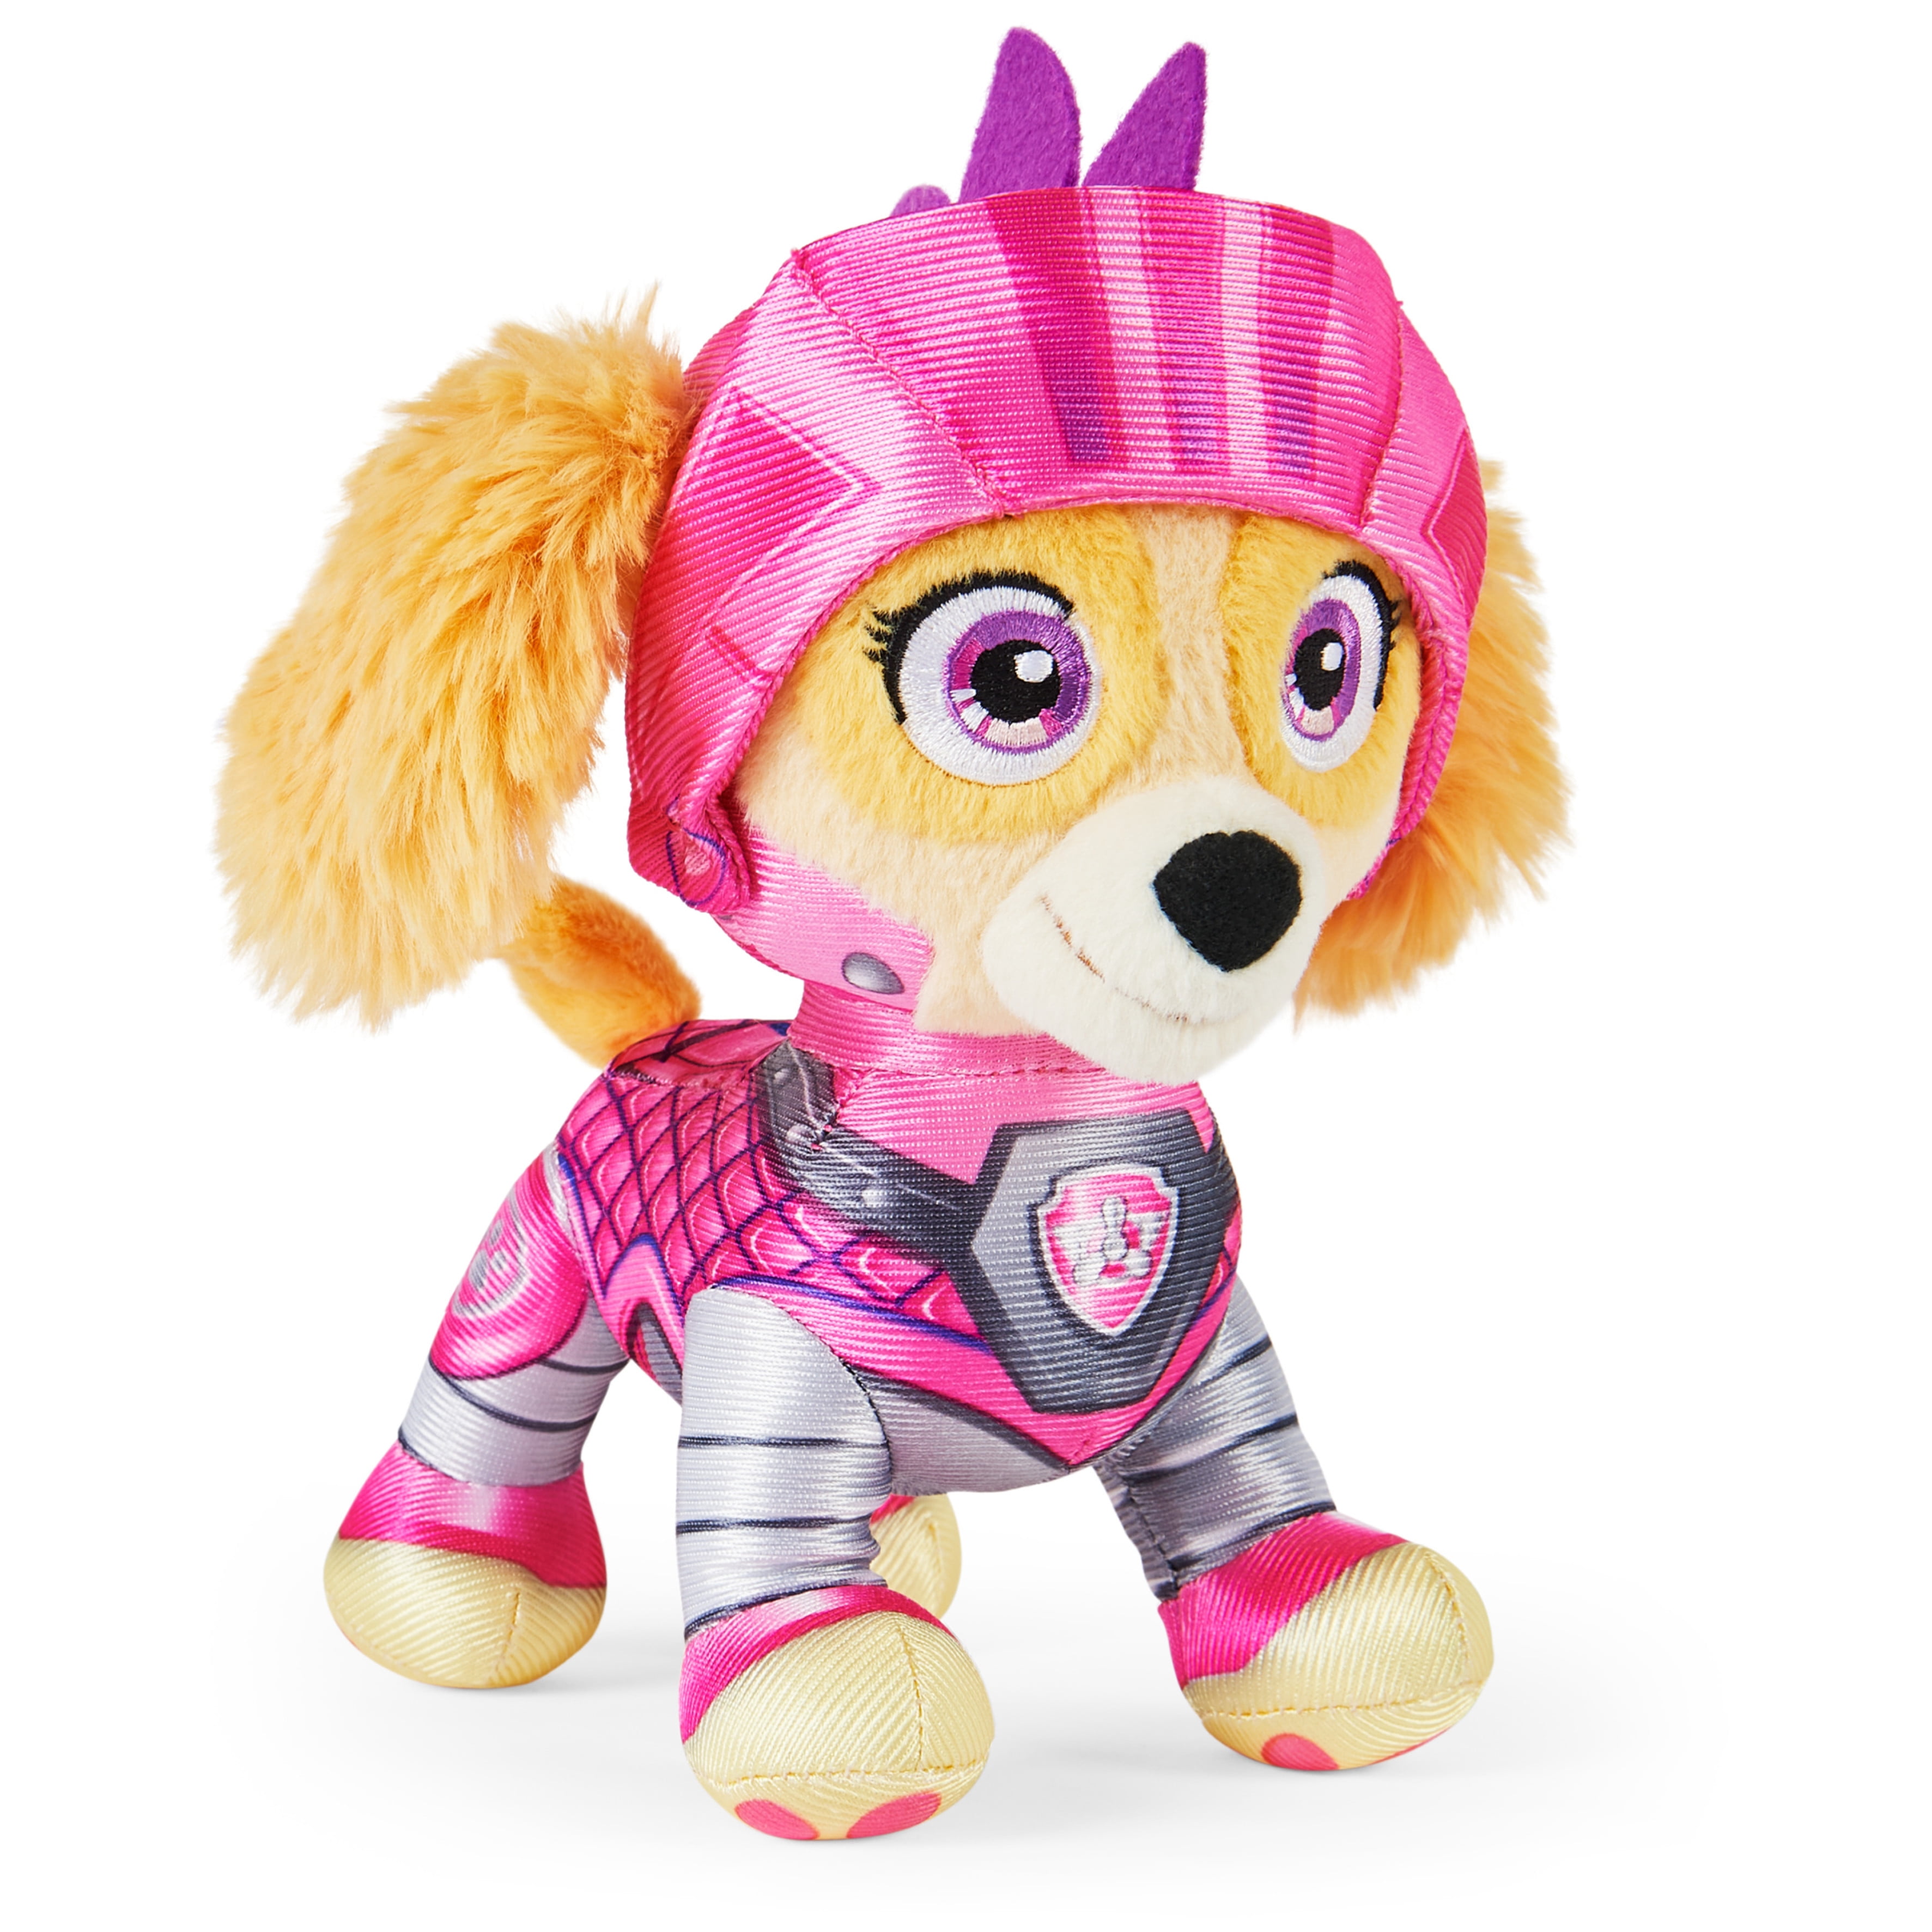 add 2 to cart Paw Patrol 8" Plush Pup Pals---Authentic!!! Buy 1 Get 1 25% OFF 